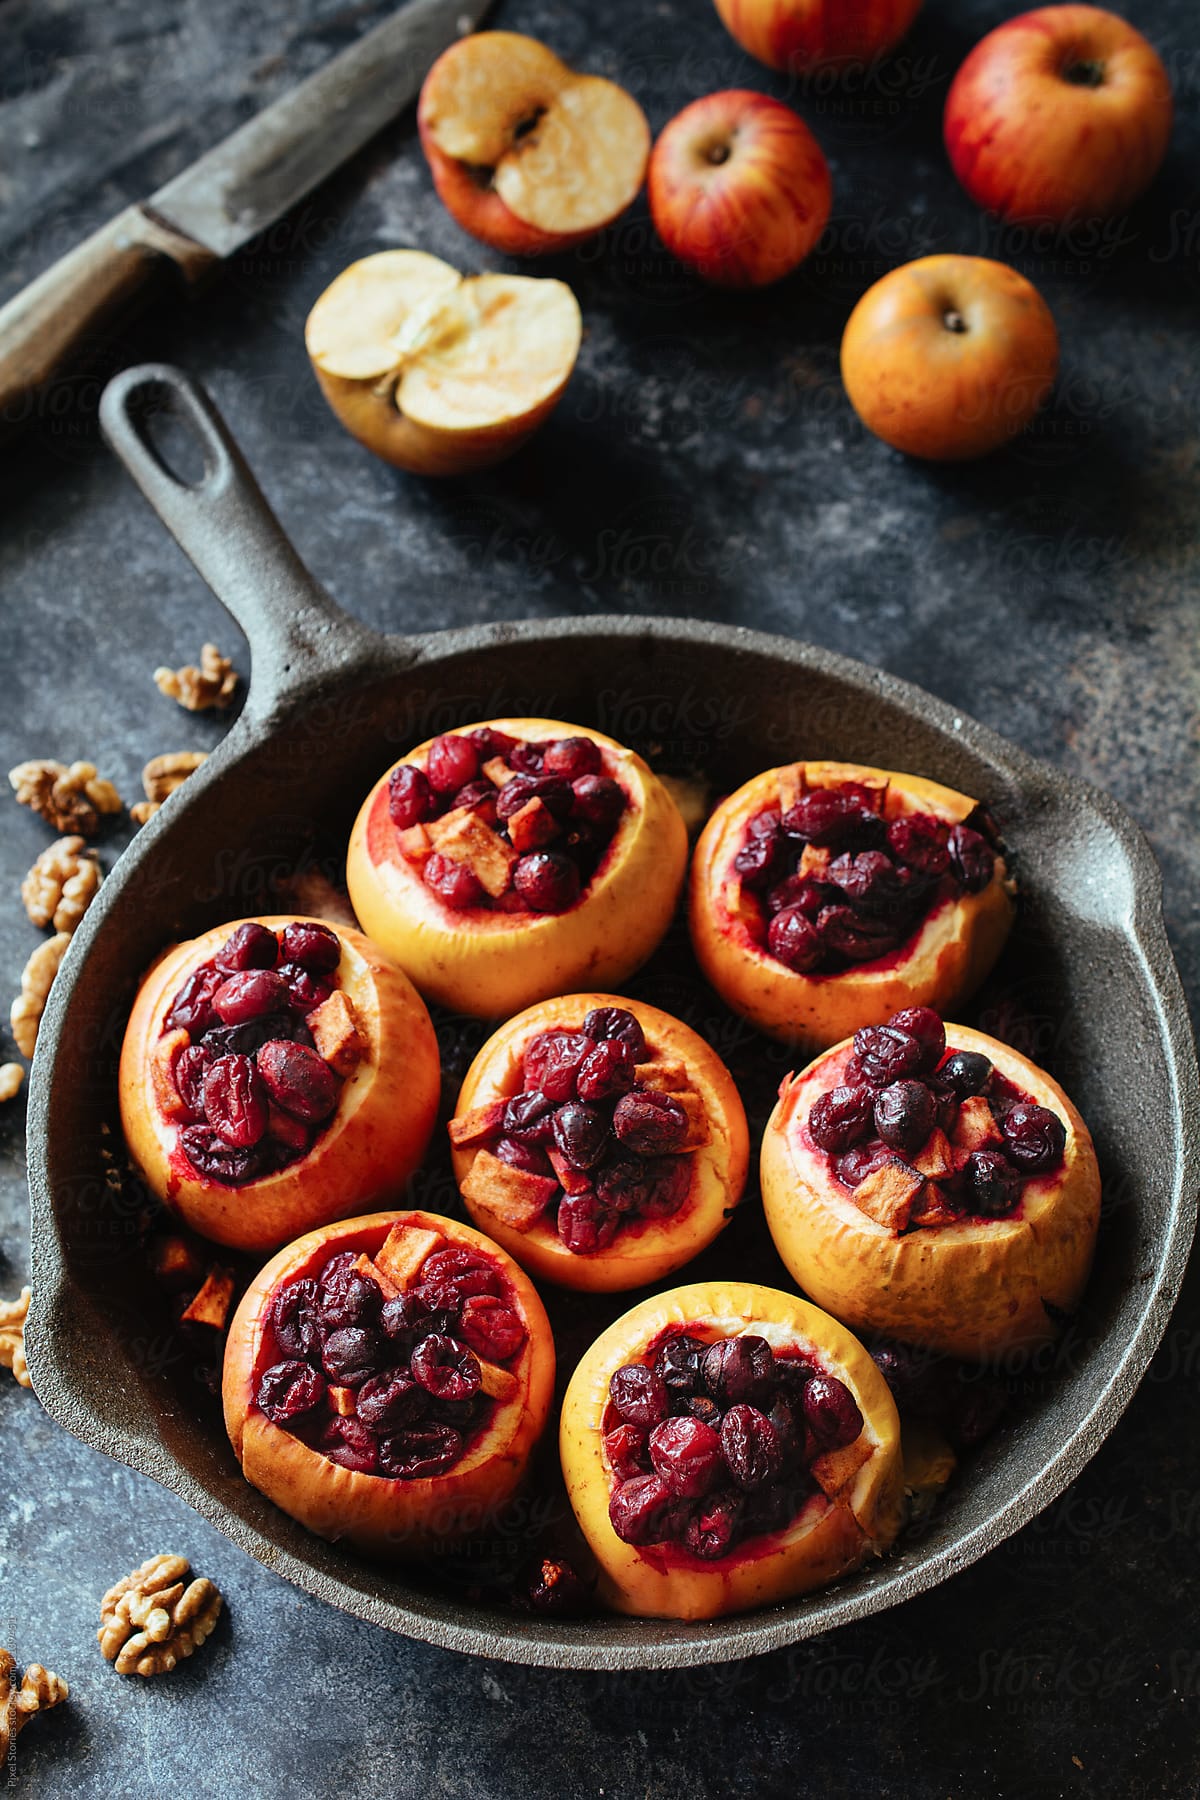 Autumn food: Baked windfall apples stuffed with fruits